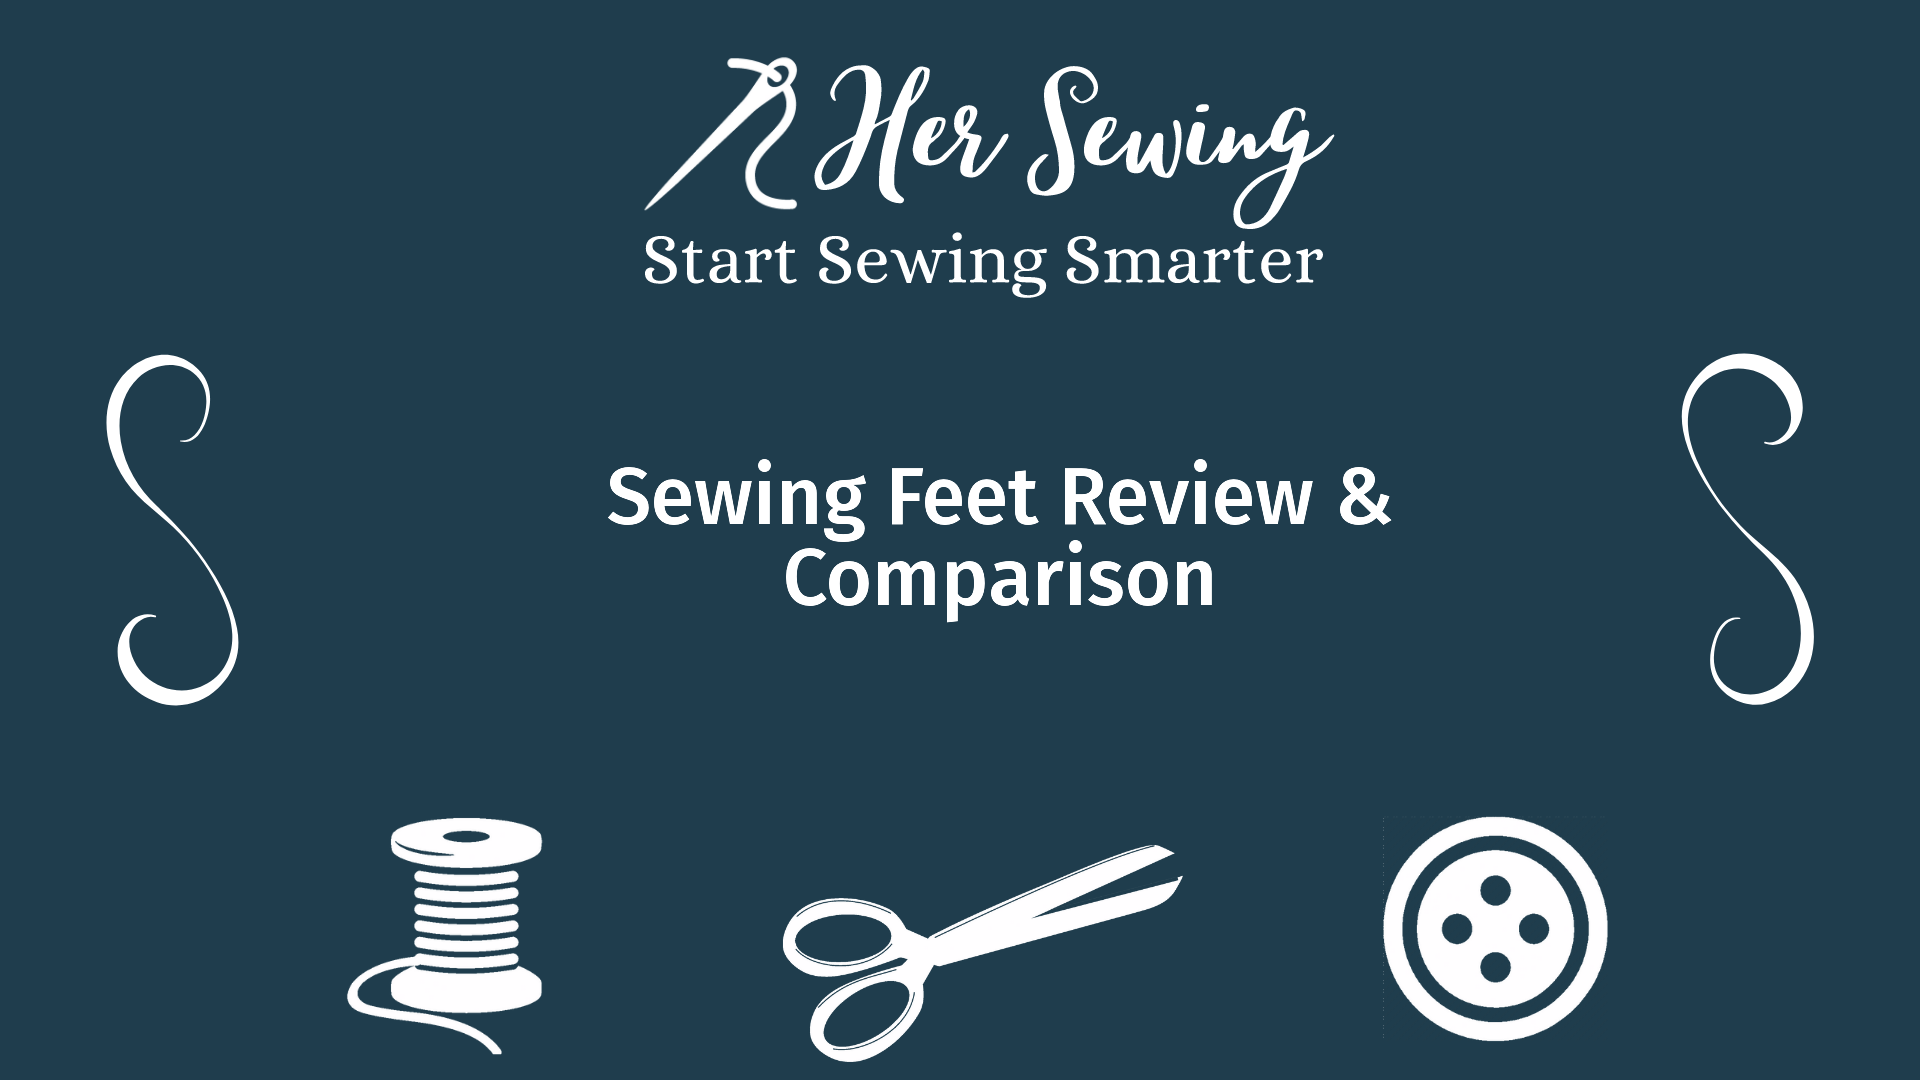 Sewing Feet Review & Comparison